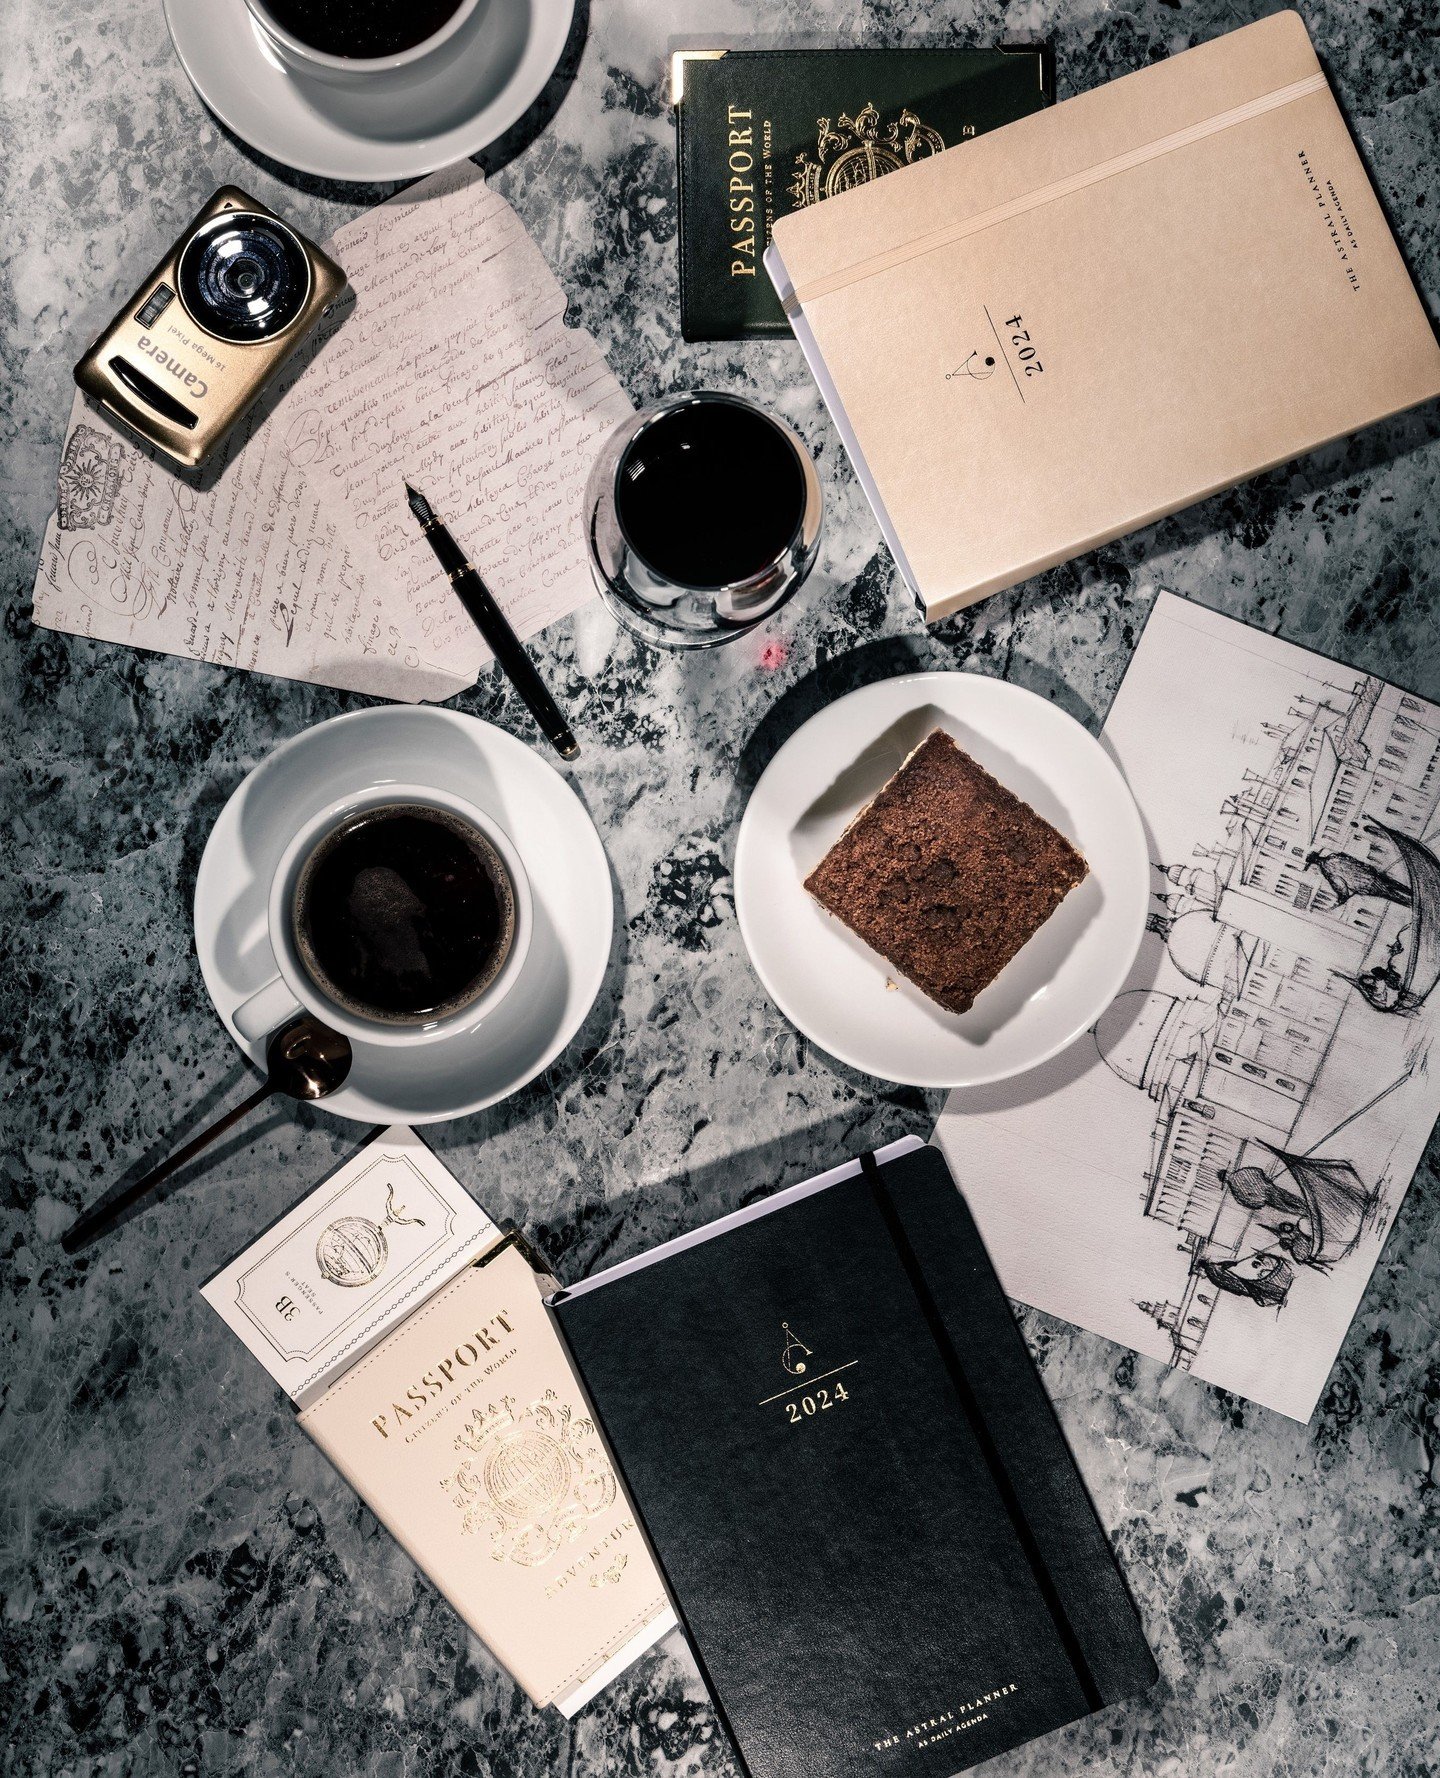 Crafted in a durable, smooth vegan leather, our nearly sold out A5 Daily Agenda is your portable, spiritual sidekick for busy schedules and life's adventures.⁠
⁠
Notable features include our signature day-per-page format, now enhanced with independen